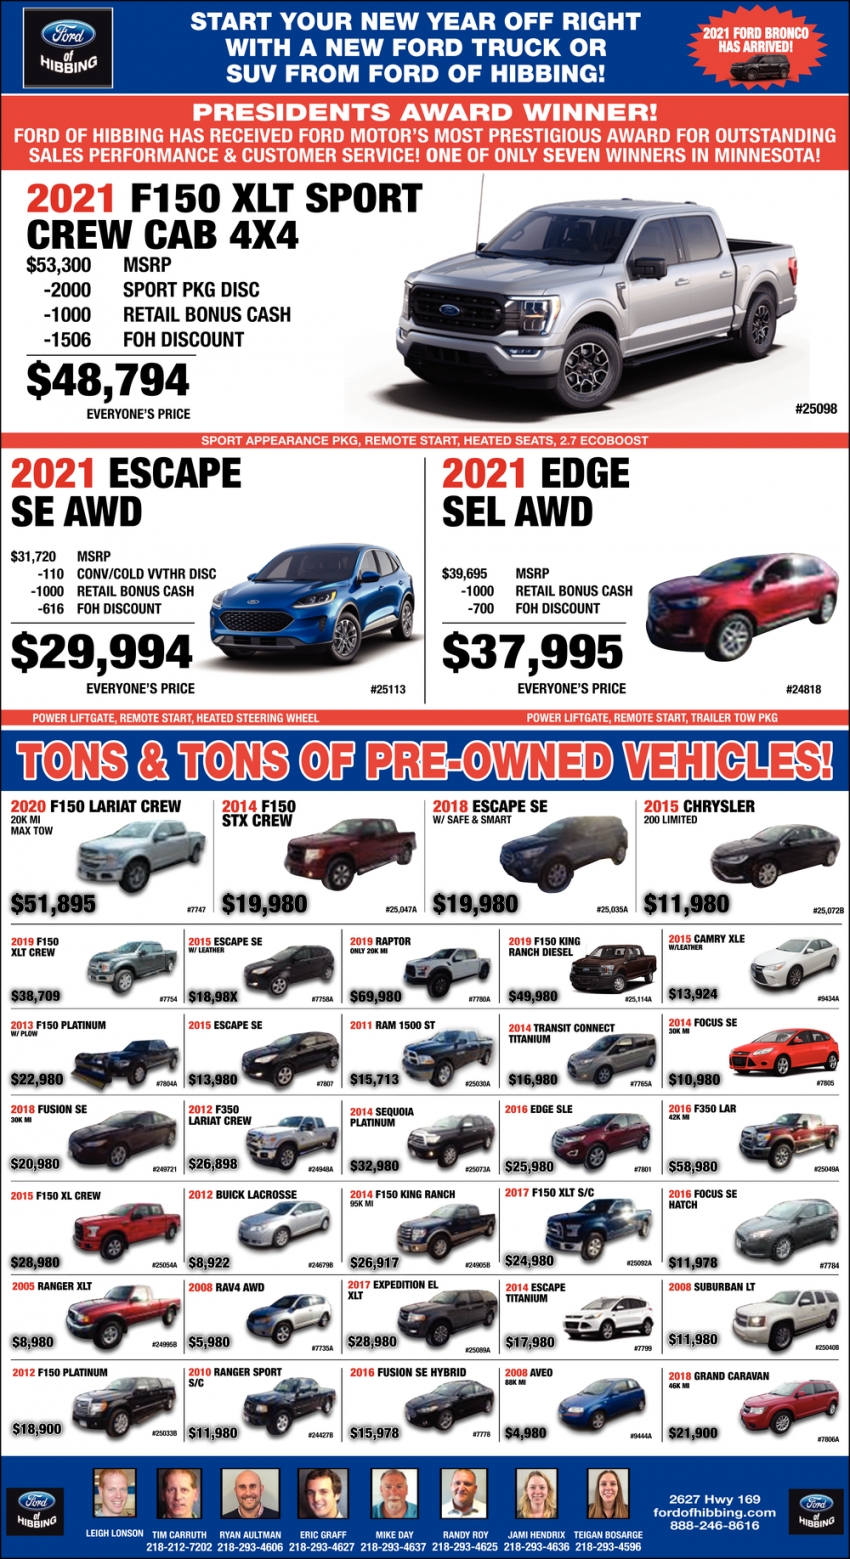 Tons & Tons Of Pre-Owned Vehicles!